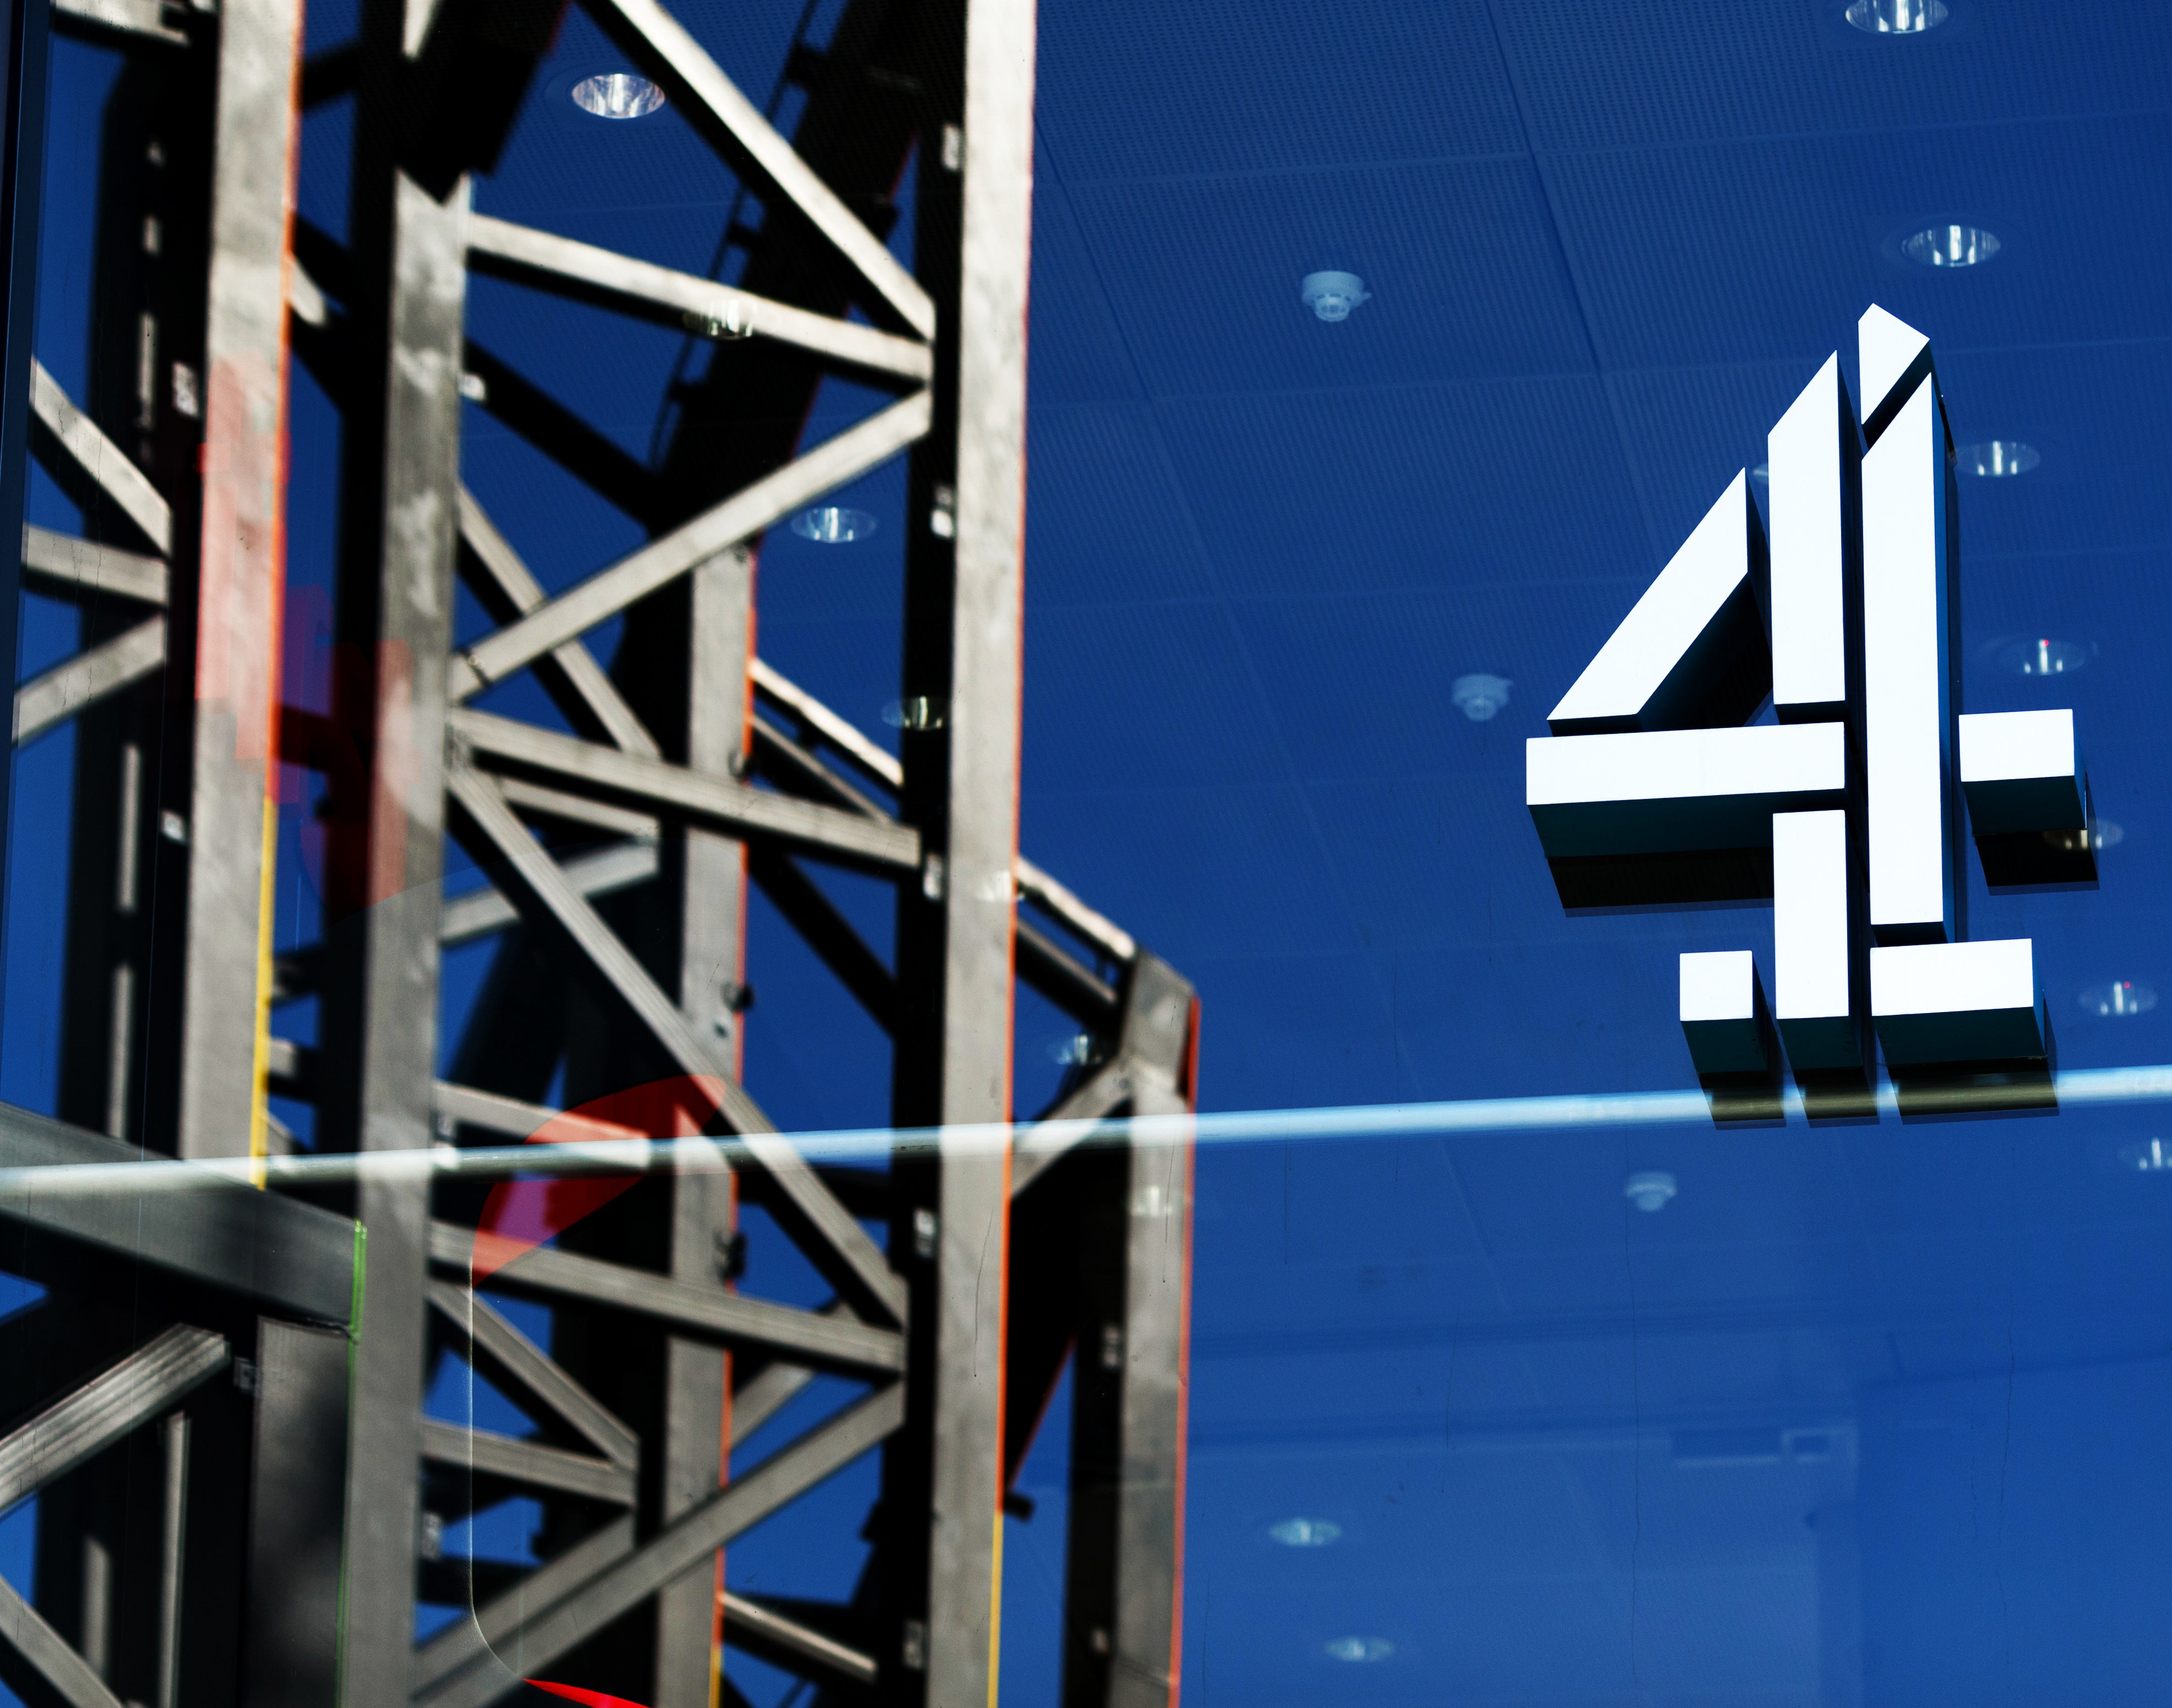 Stephen Lambert took aim at the Government’s plans to privatise Channel 4 (PA)